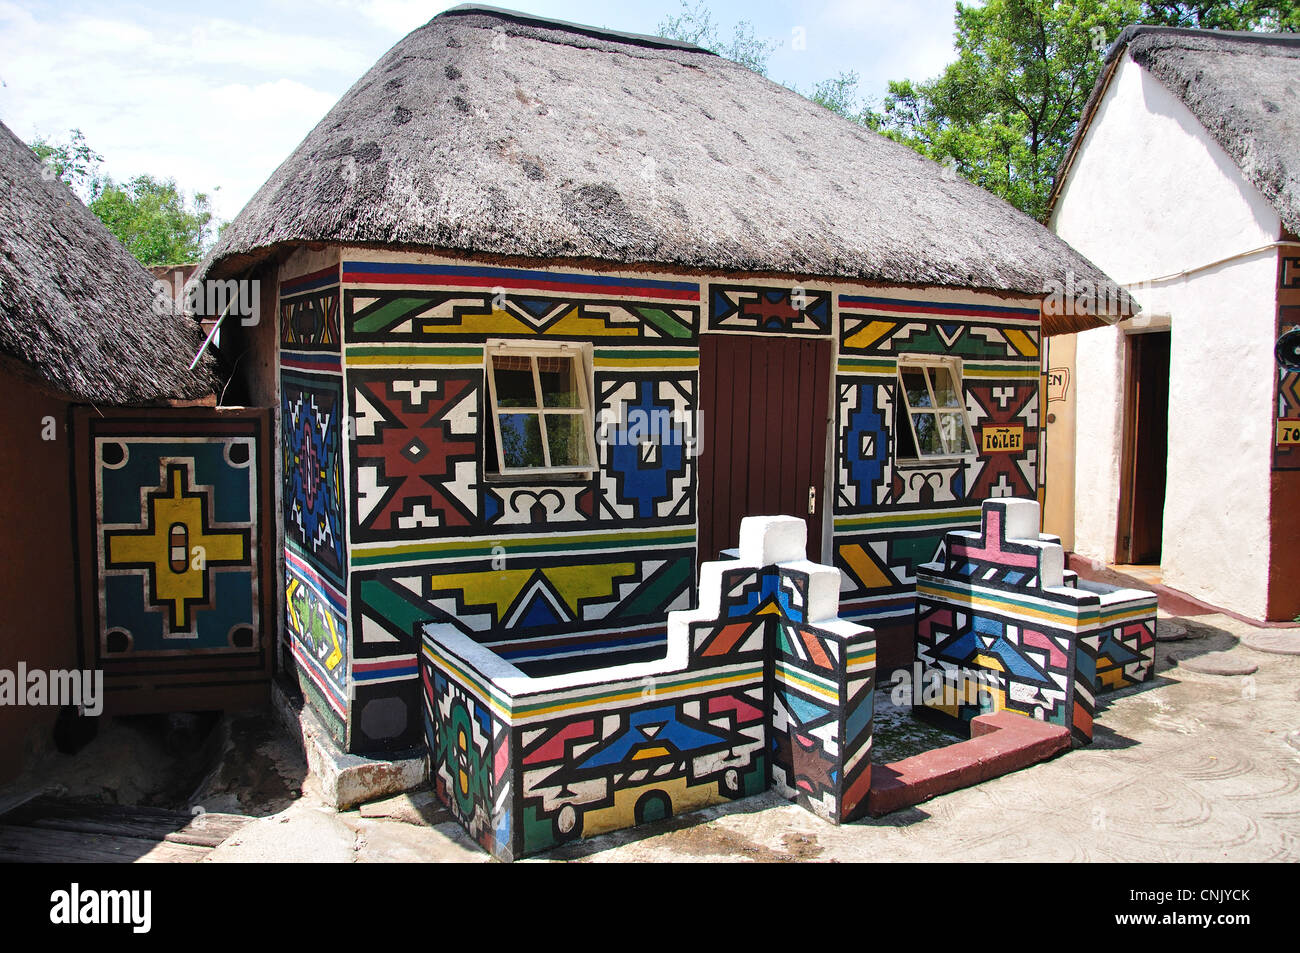 Colourful Ndebele dwelling, Lesedi African Cultural Village, Broederstroom, Johannesburg, Gauteng, Republic of South Africa Stock Photo